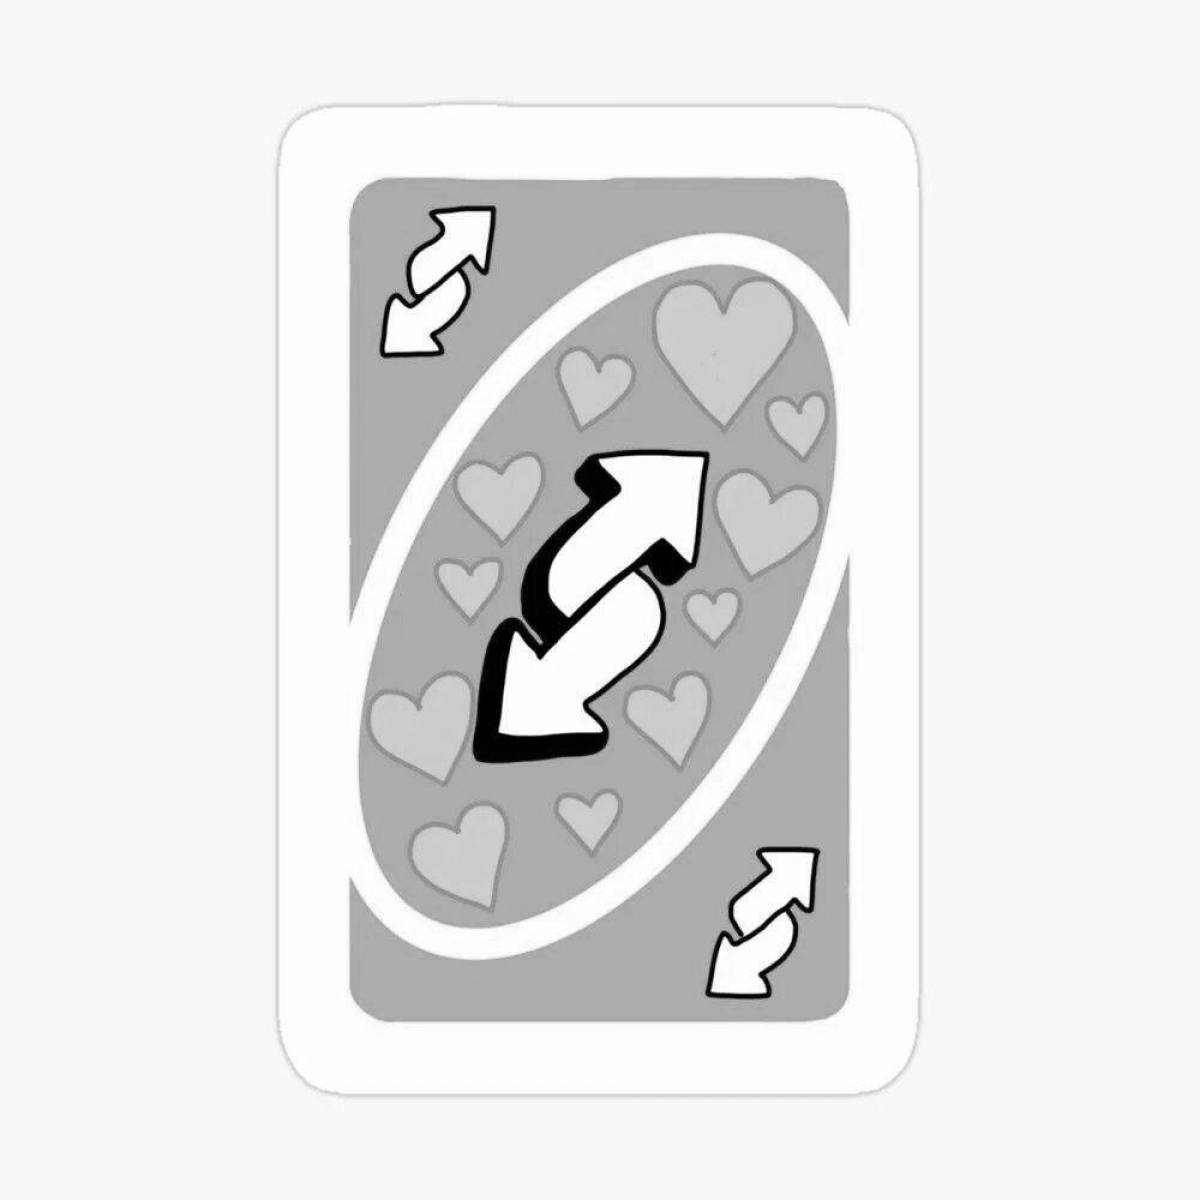 Beautiful uno card with hearts